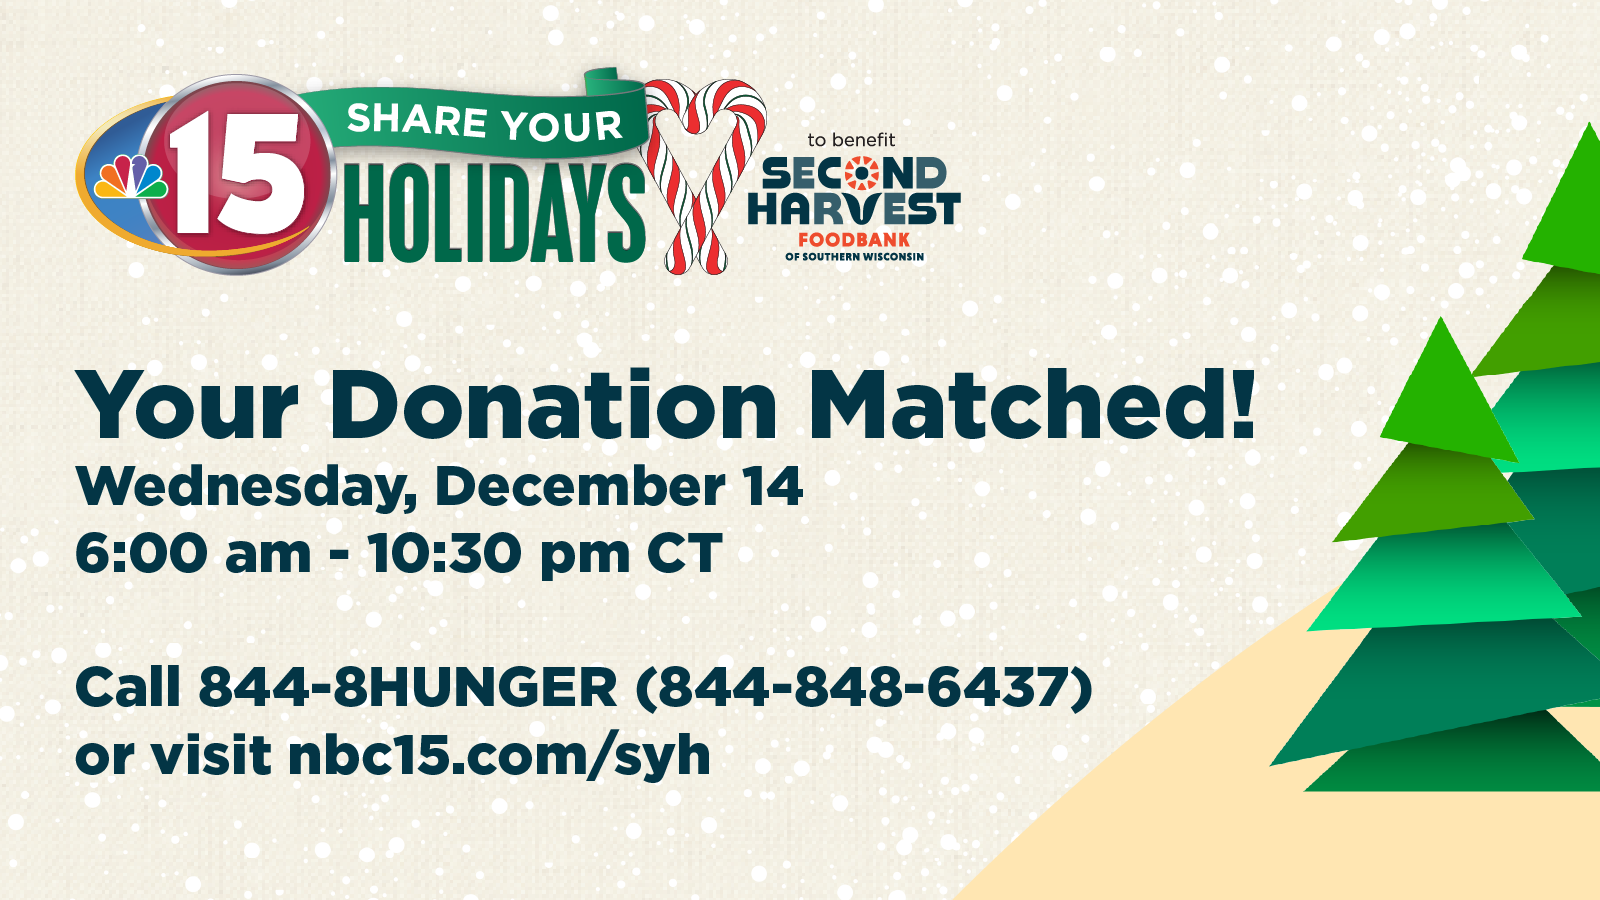 Your Donation Matched! Wednesday, December 14 6:00 am - 10:30 pm CT Call 844-8HUNGER (844-848-6437) or visit nbc15.com/syh